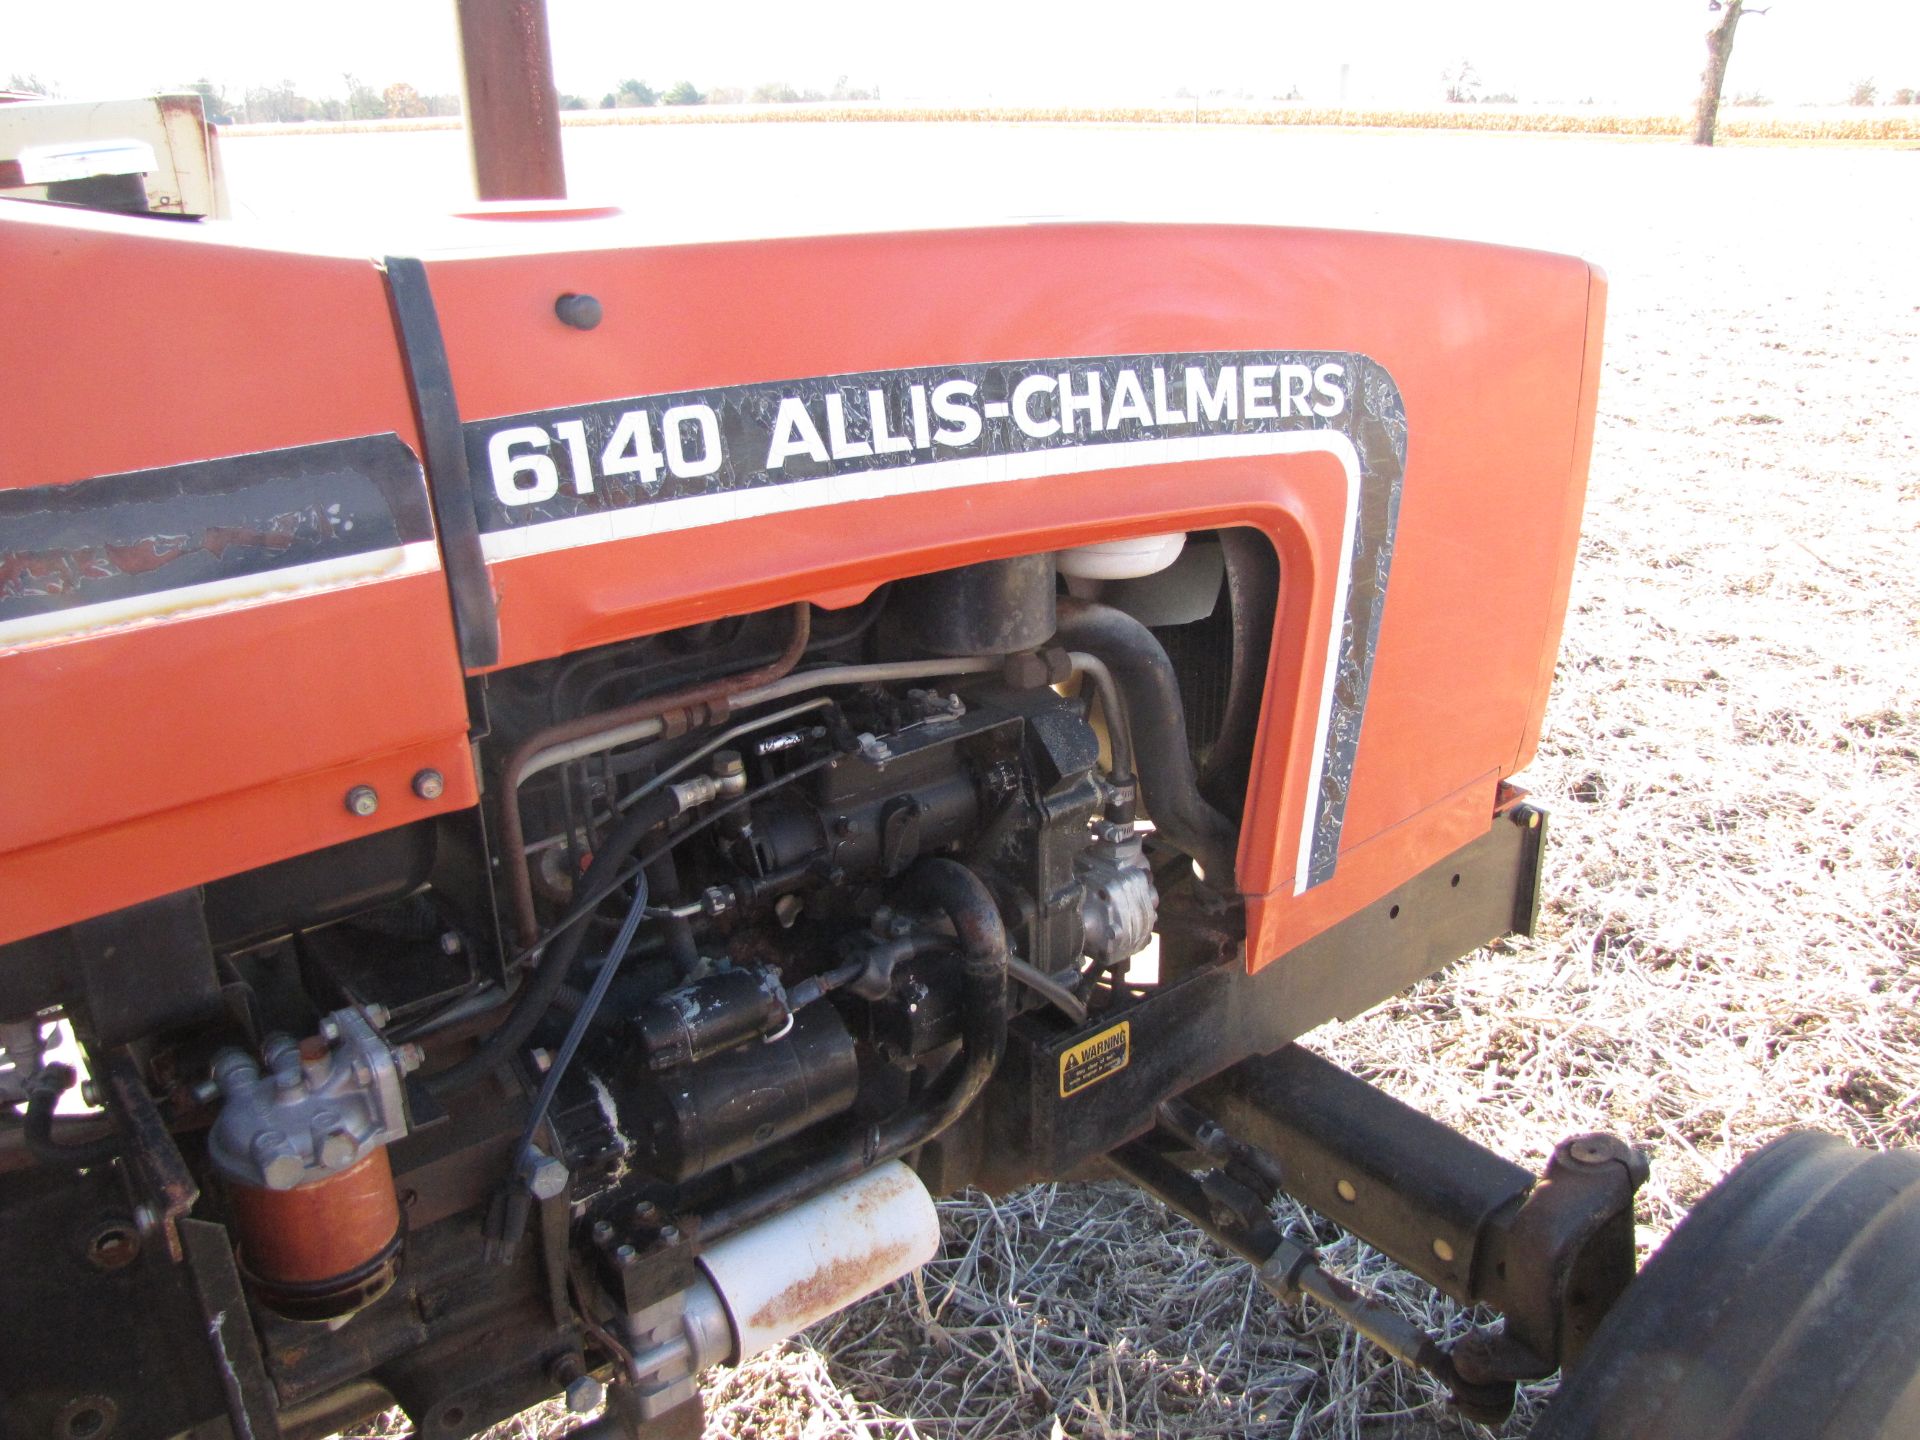 Allis-Chalmers 6140 Tractor - Image 36 of 43